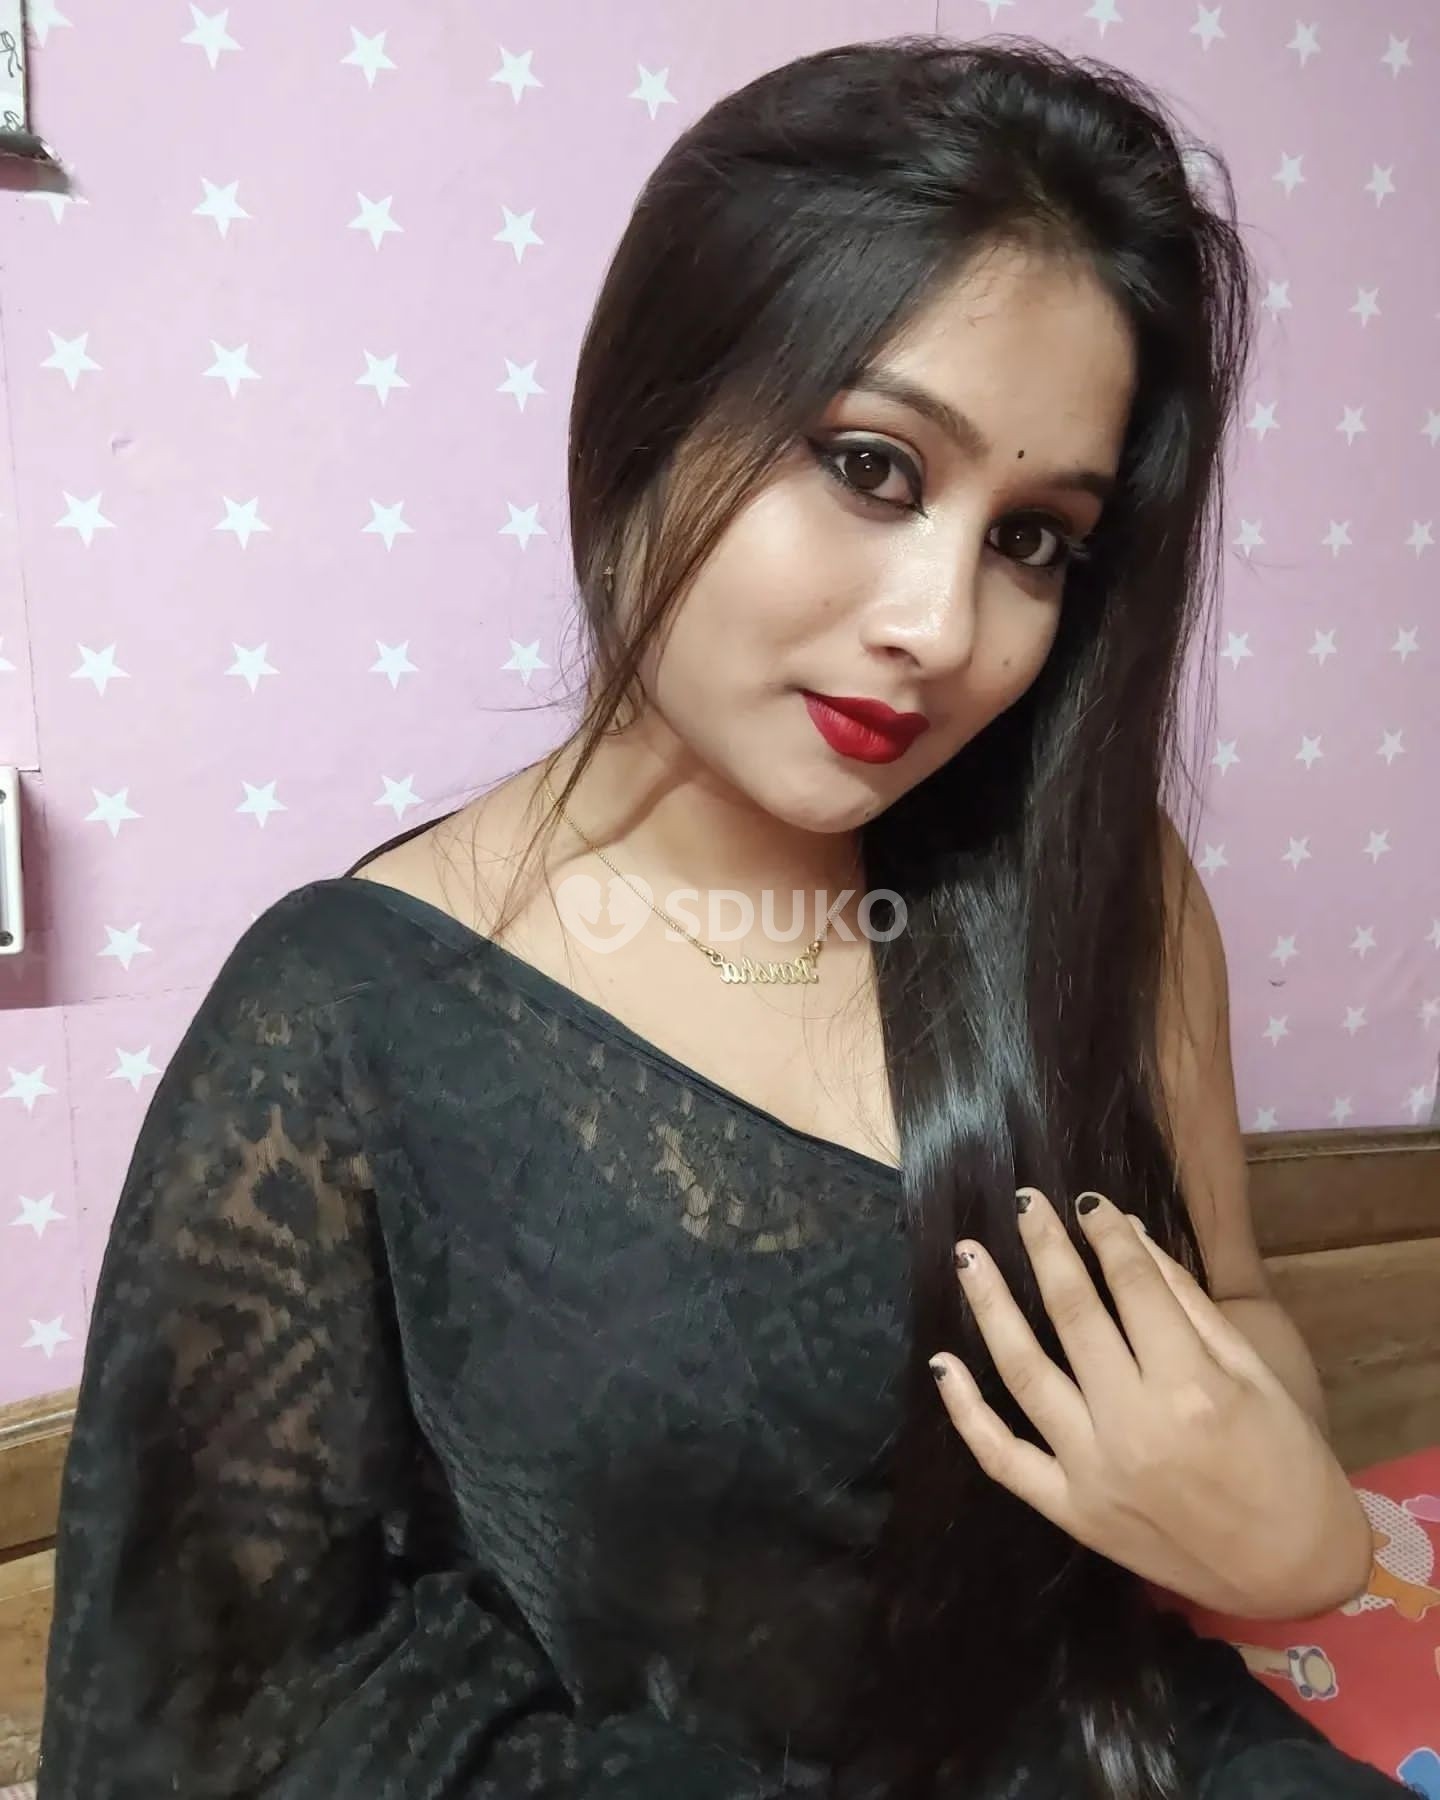 MALAD 🆑 TODAY LOW PRICE 100% SAFE AND SECURE GENUINE CALL GIRL ANYTIME CALL ME